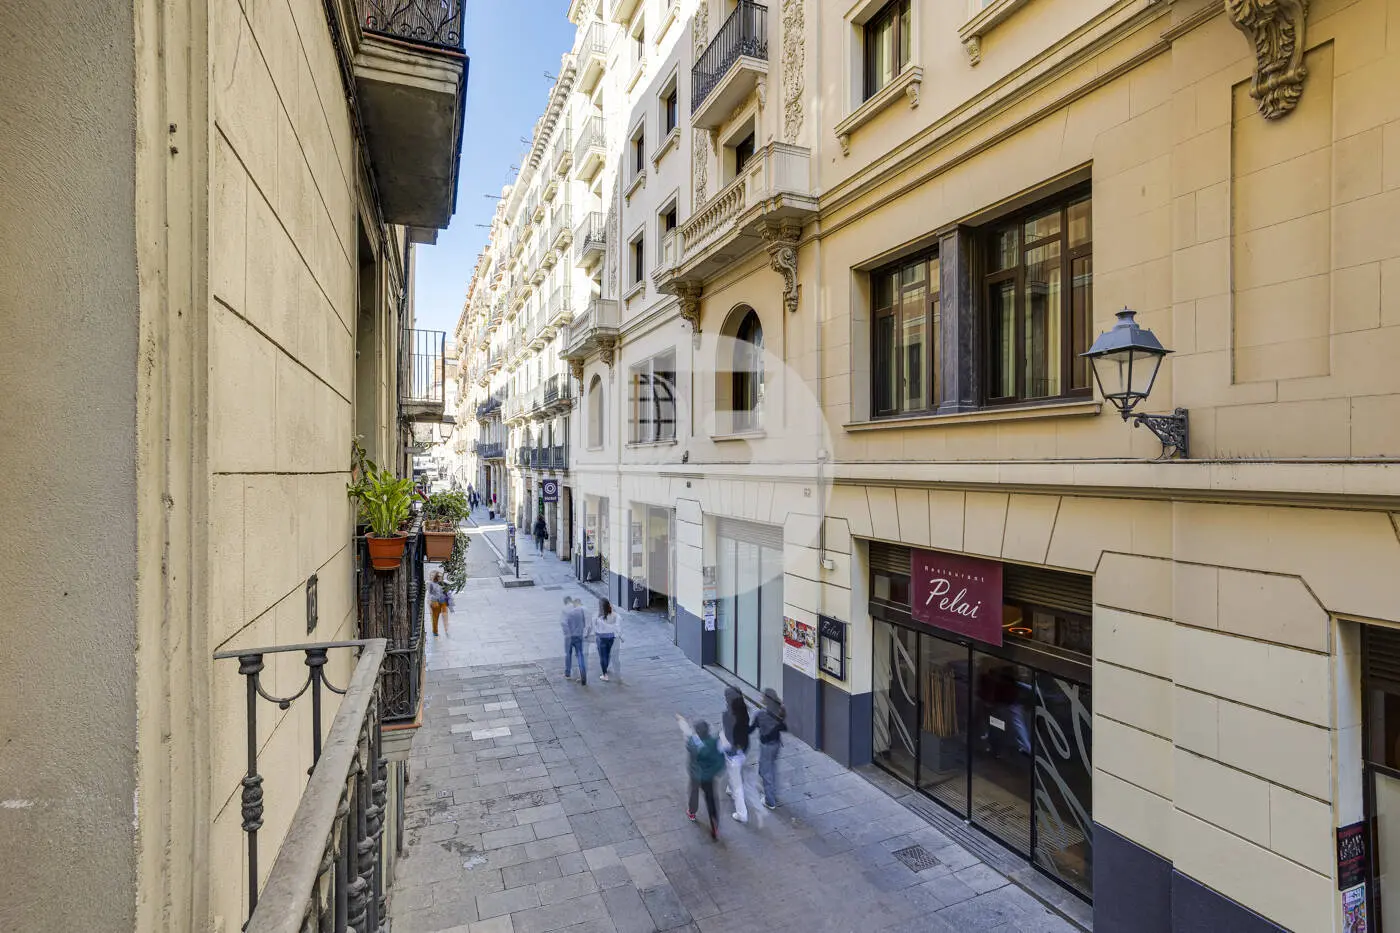 Magnificent apartment for sale next to Pl Universitat of 114m2 according to the land registry, located on Tallers Street in the Ciutat Vella neighborhood of Barcelona 32